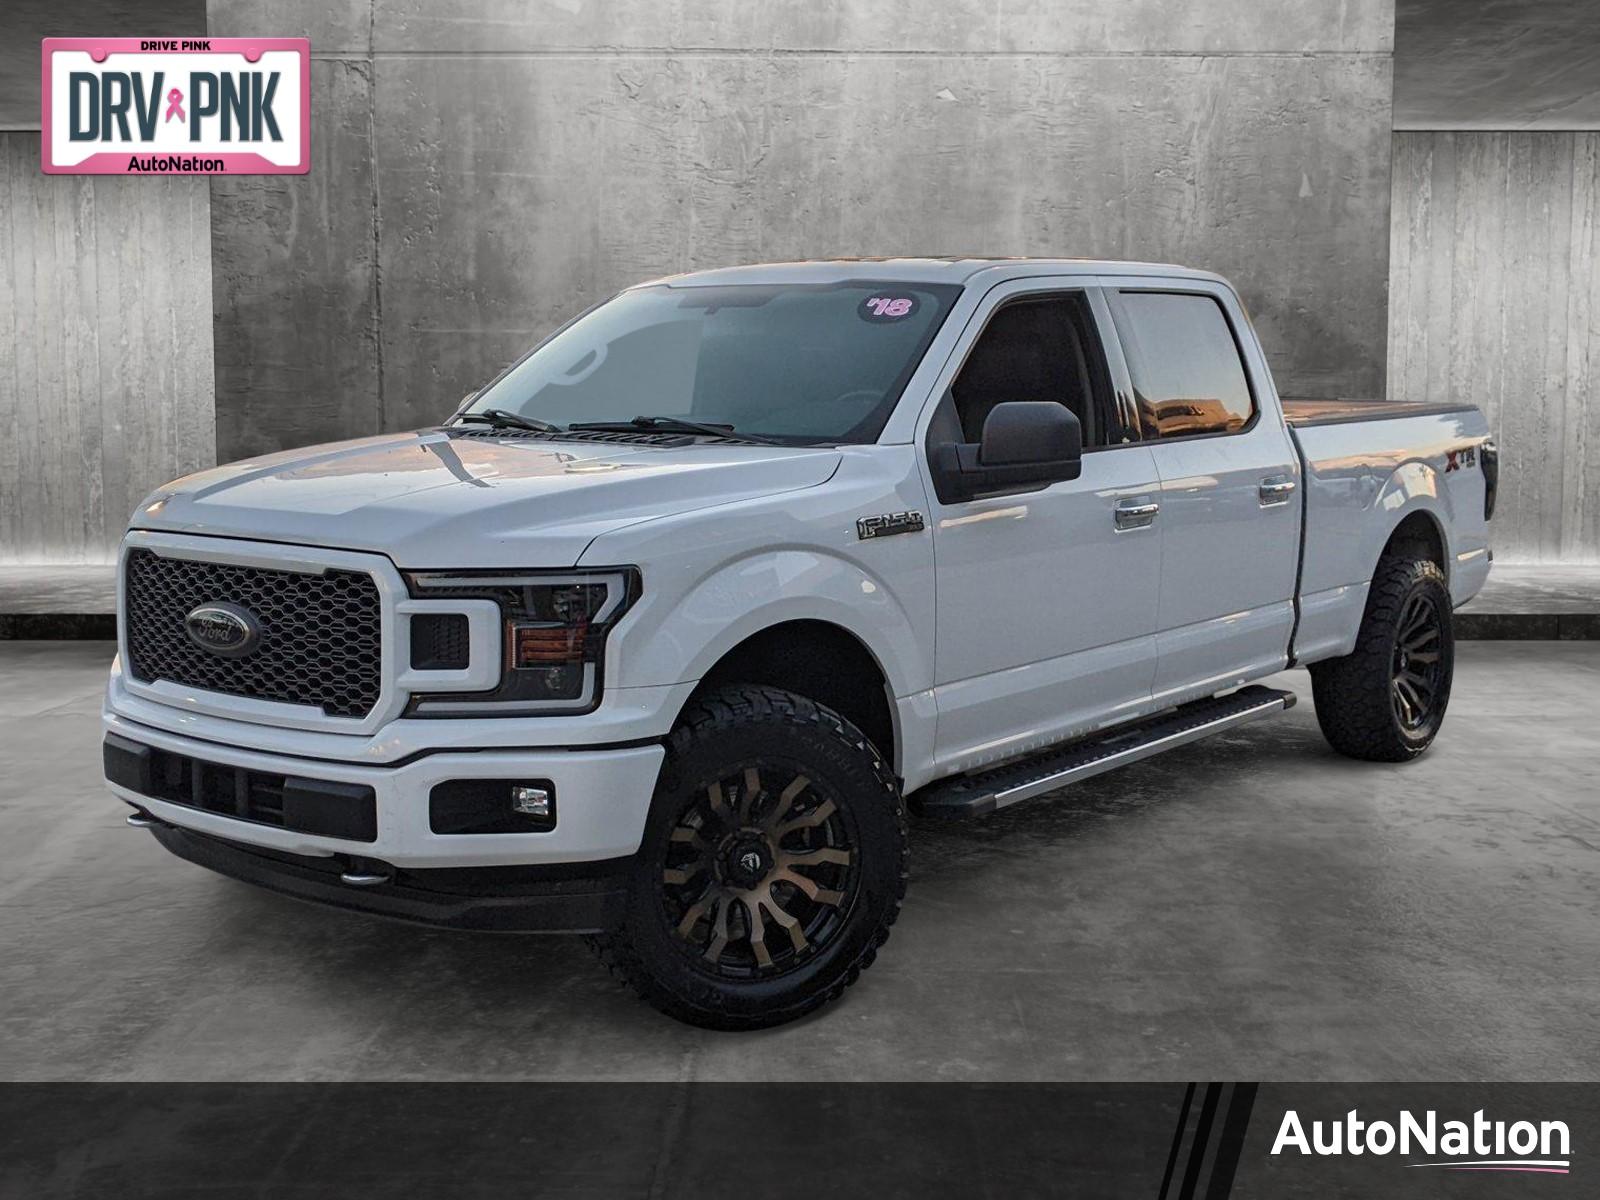 2018 Ford F-150 Vehicle Photo in PEMBROKE PINES, FL 33024-6534